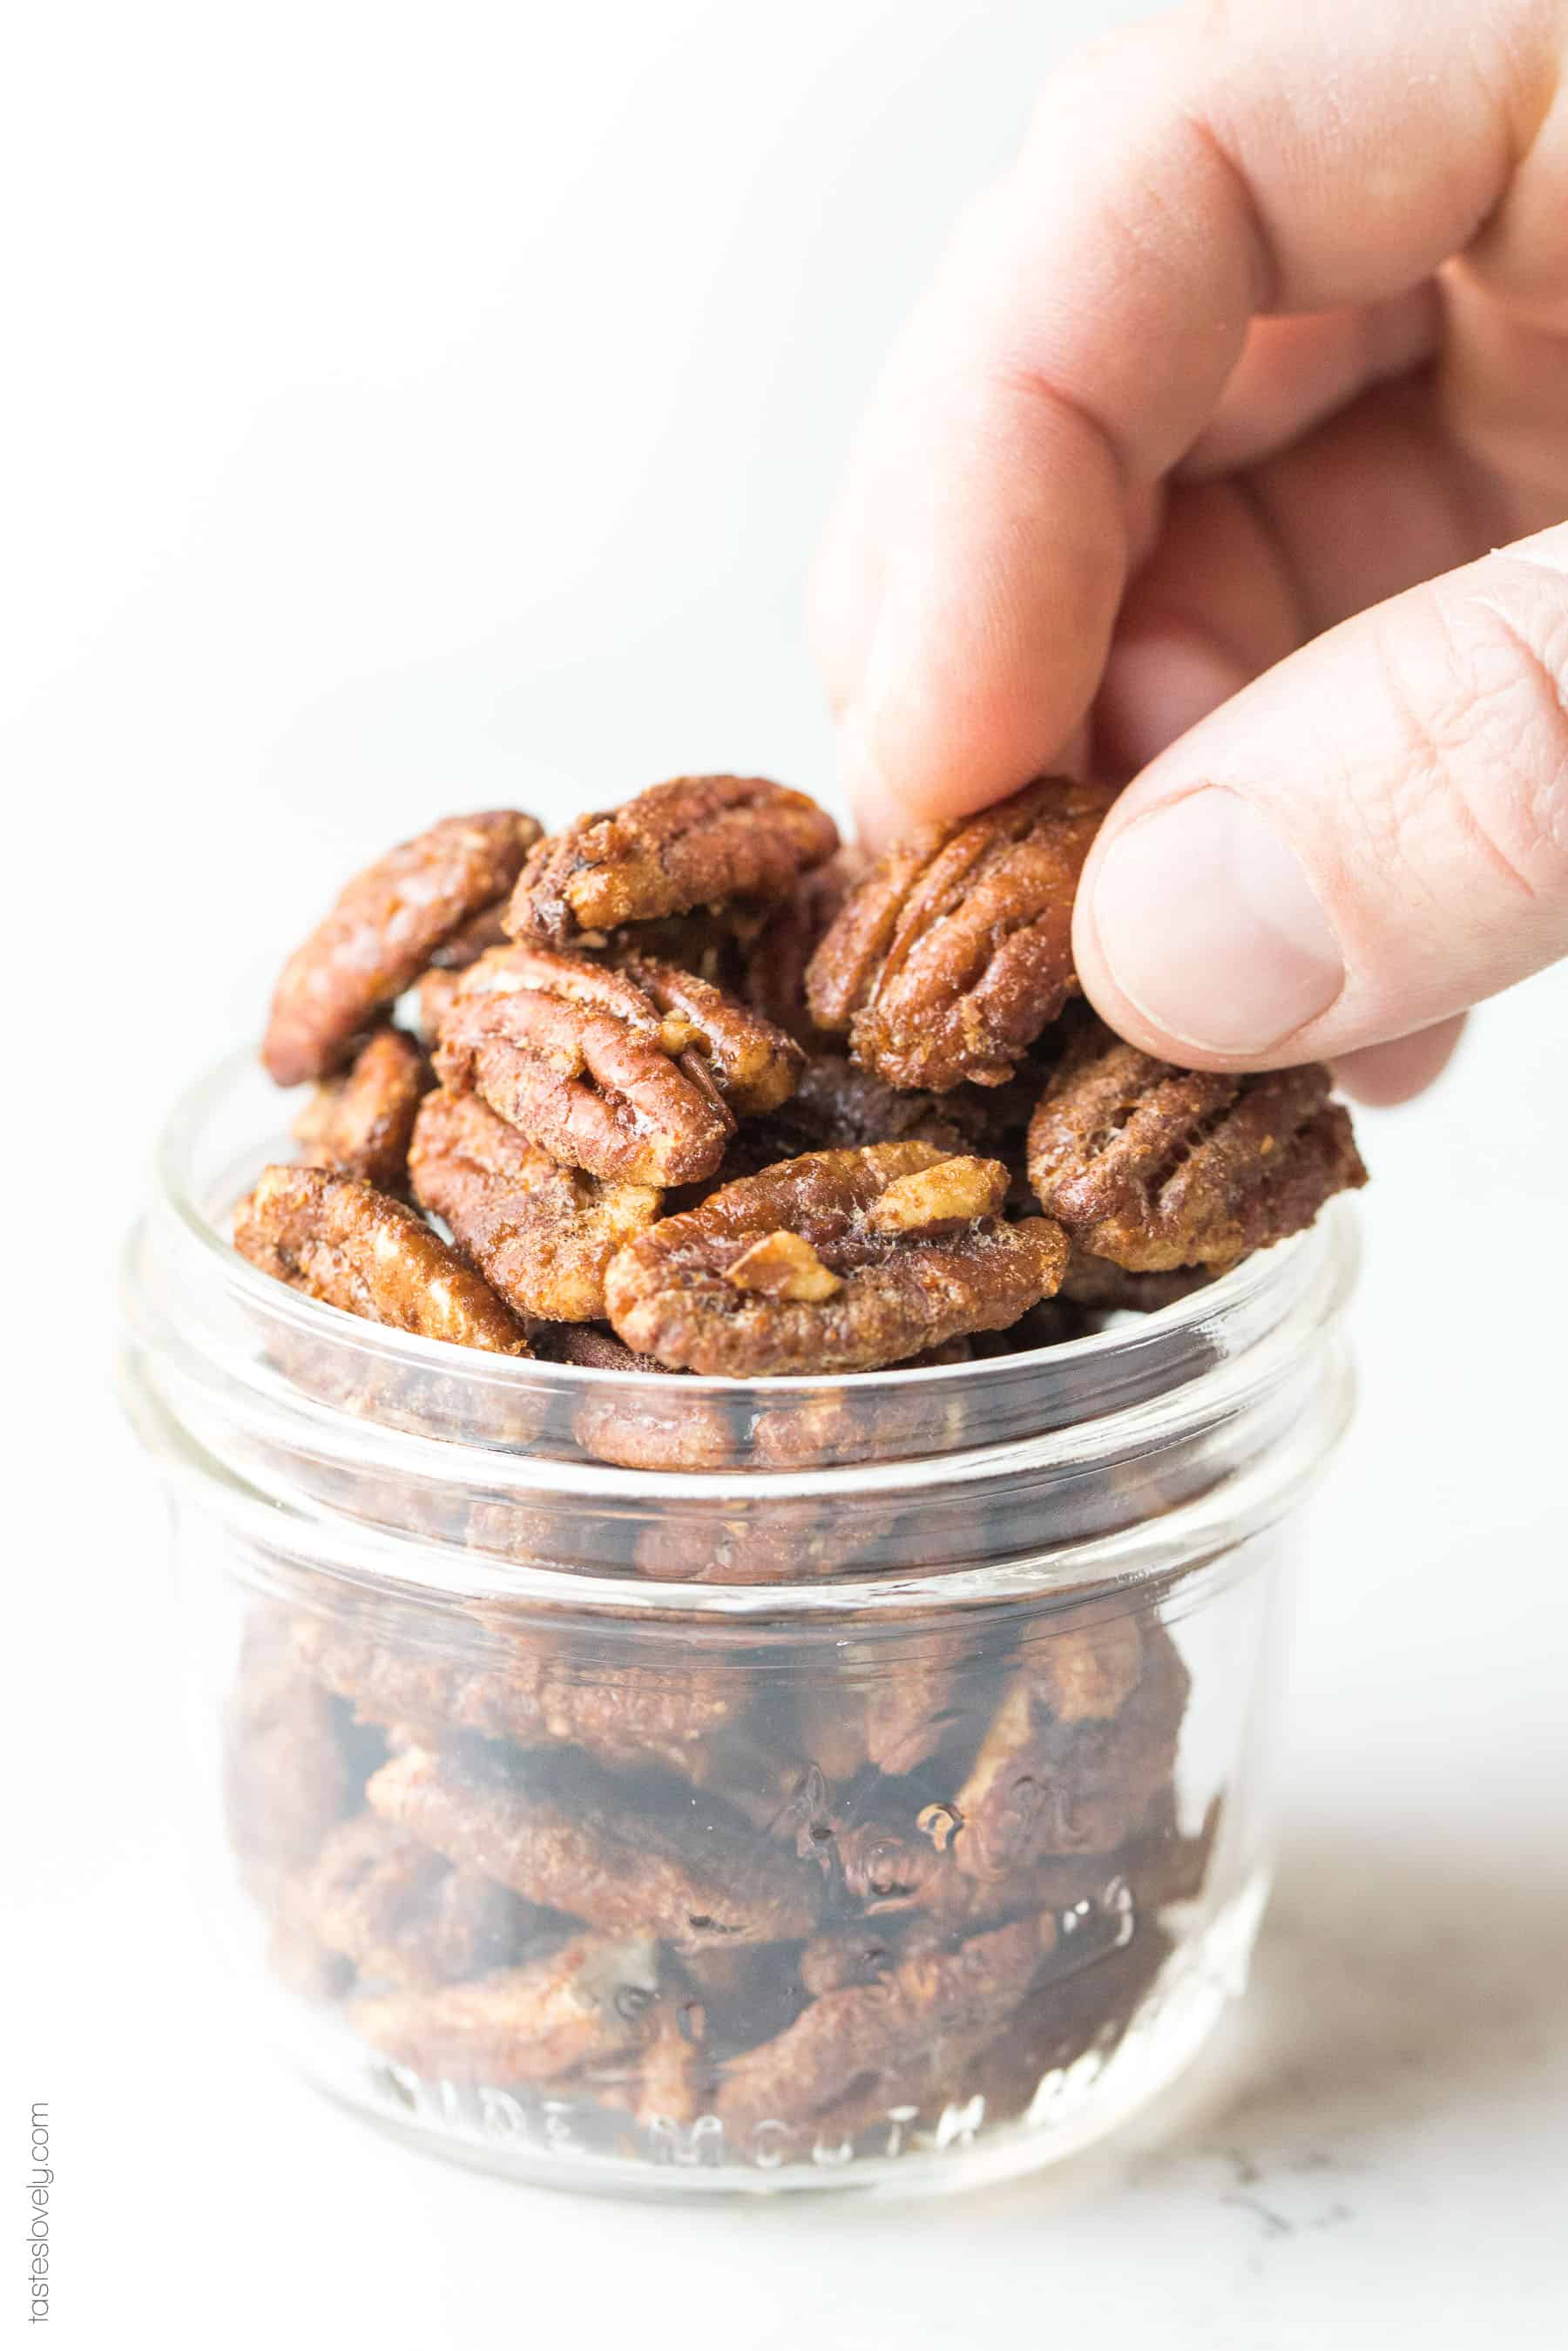 Hand picking up a candied pecan